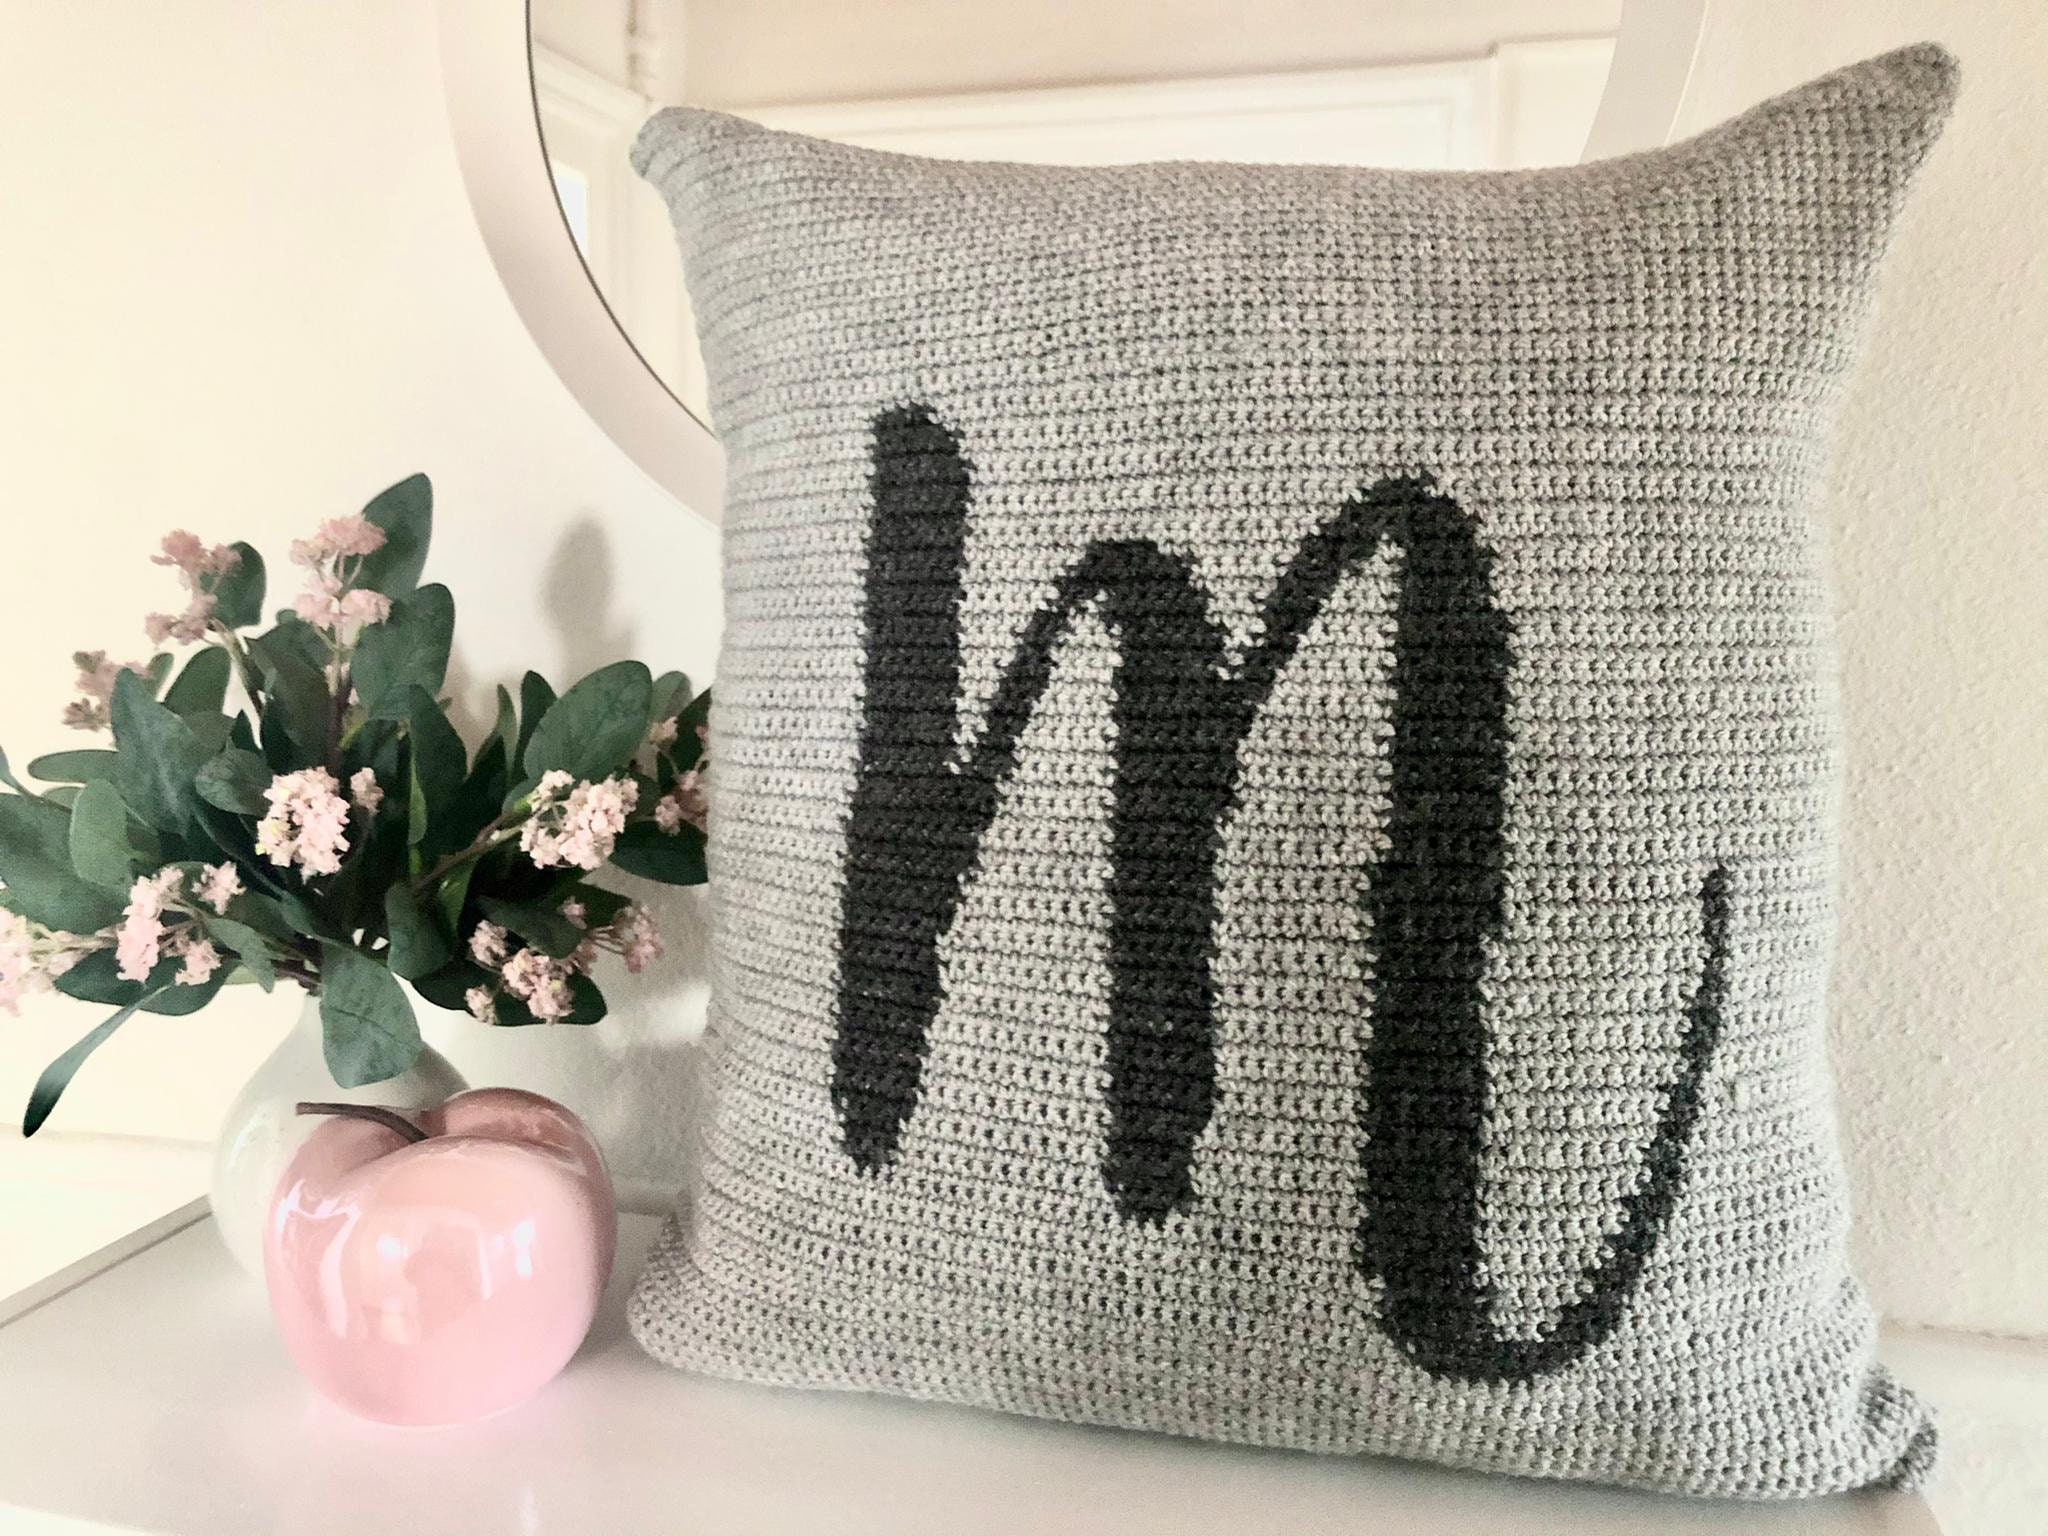 TRIENCY Personalized Monogram Pillow Case Initial Letter Throws Pillowcase  Custom Pillow Cover with …See more TRIENCY Personalized Monogram Pillow